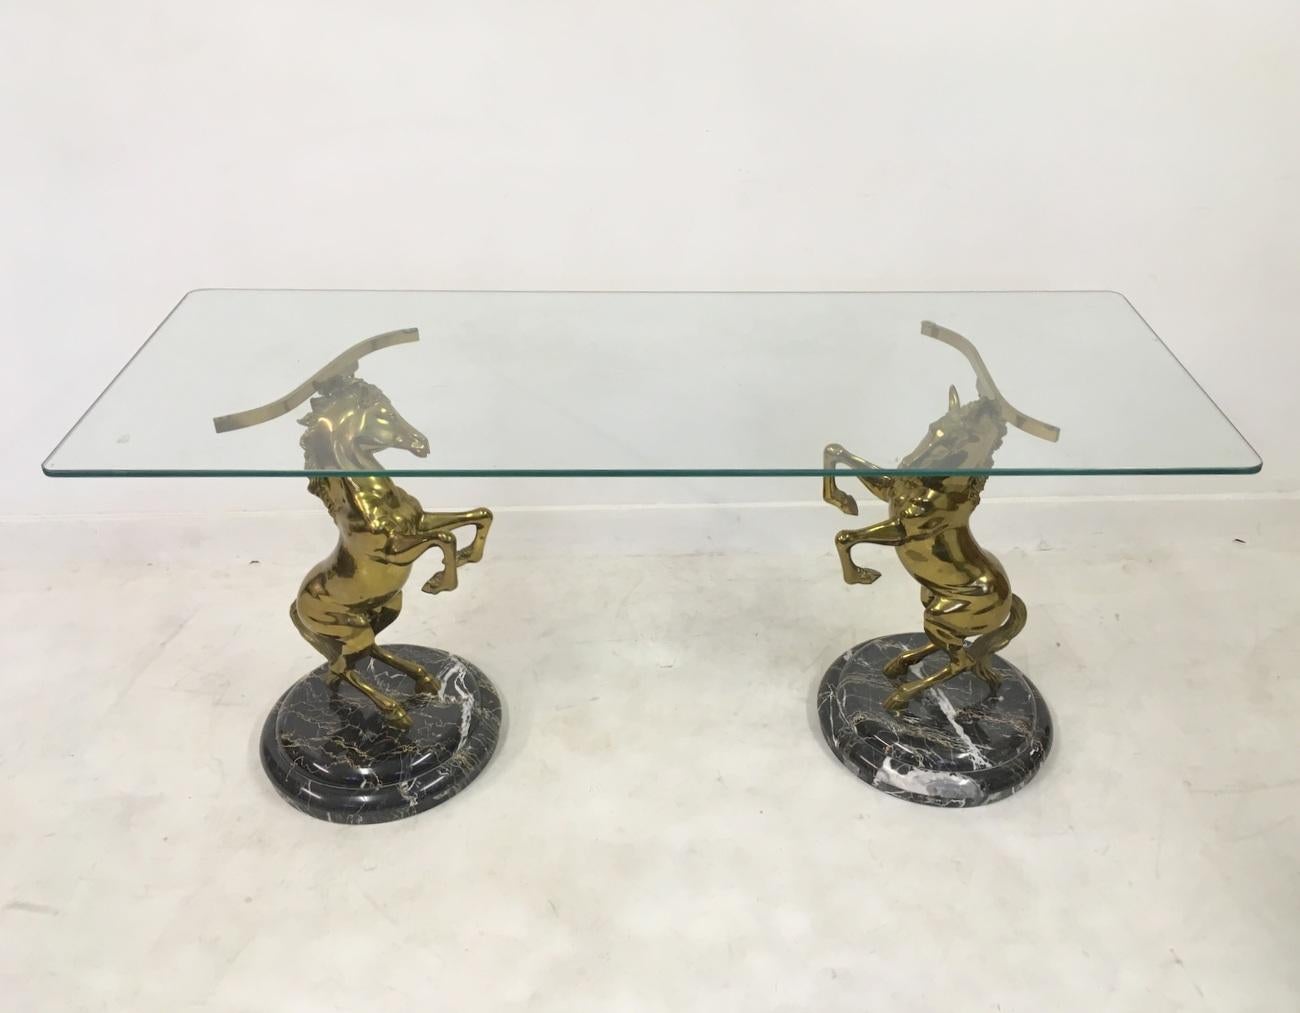 Brass horse console table
Marble base
Large size
Italian, 1970s
Excellent quality.